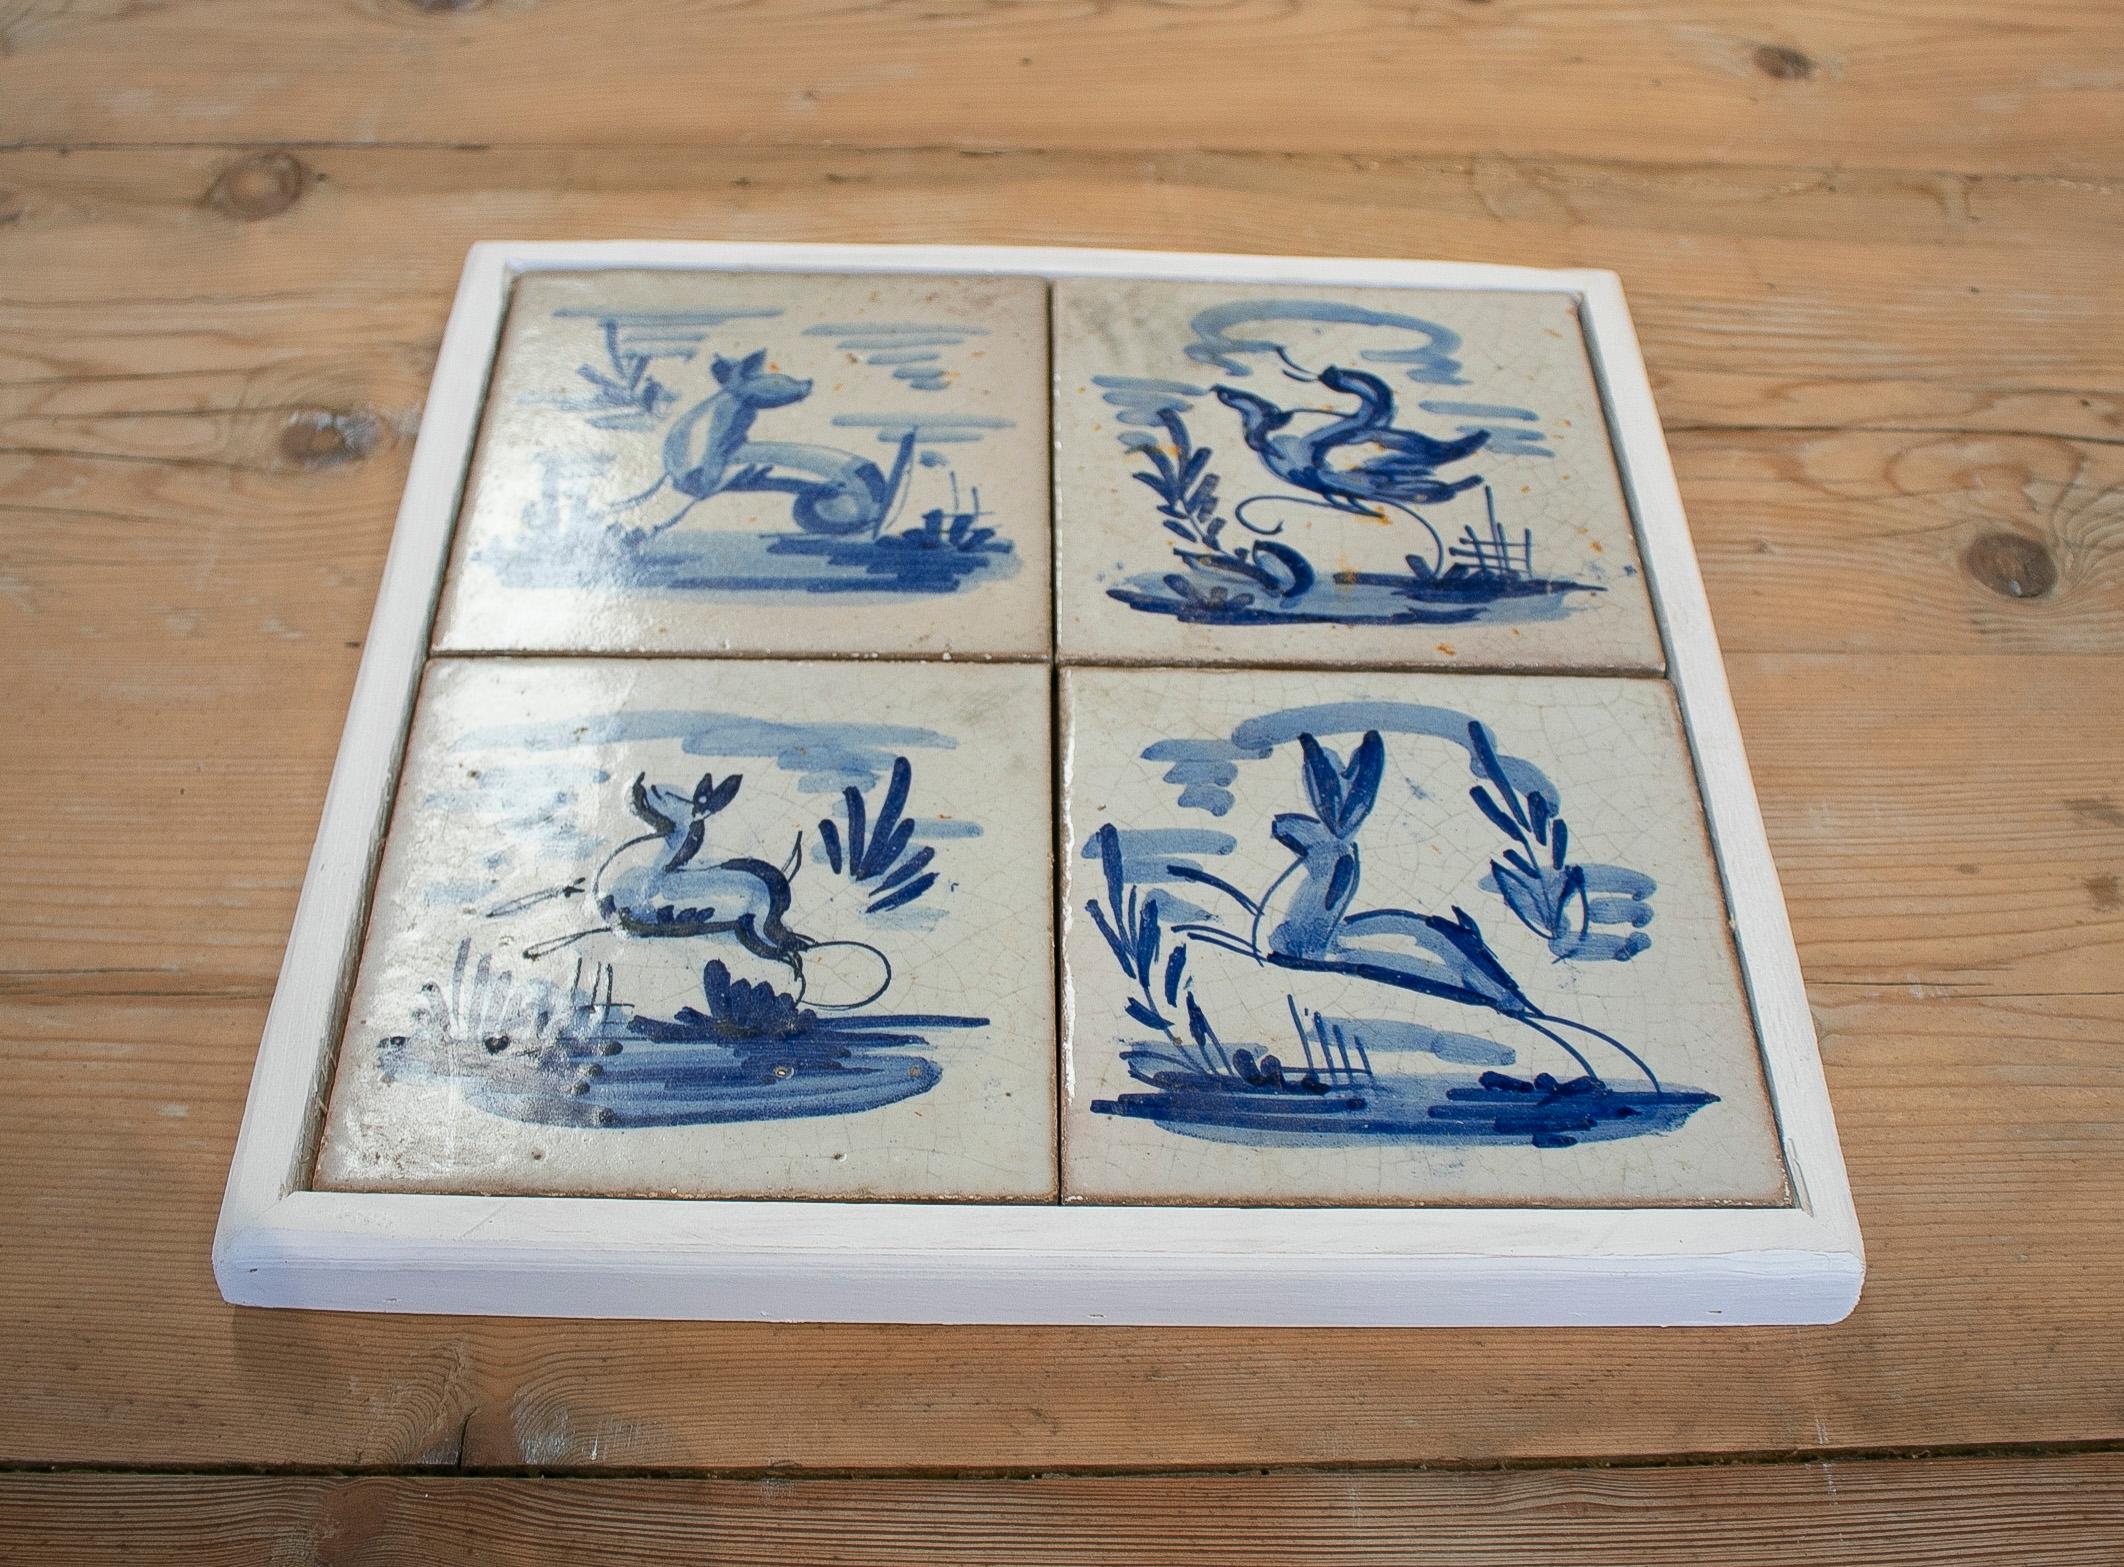 Set of four 19th century Dutch Delftware hand painted glazed ceramic tiles, framed

Dimensions exclude frame.